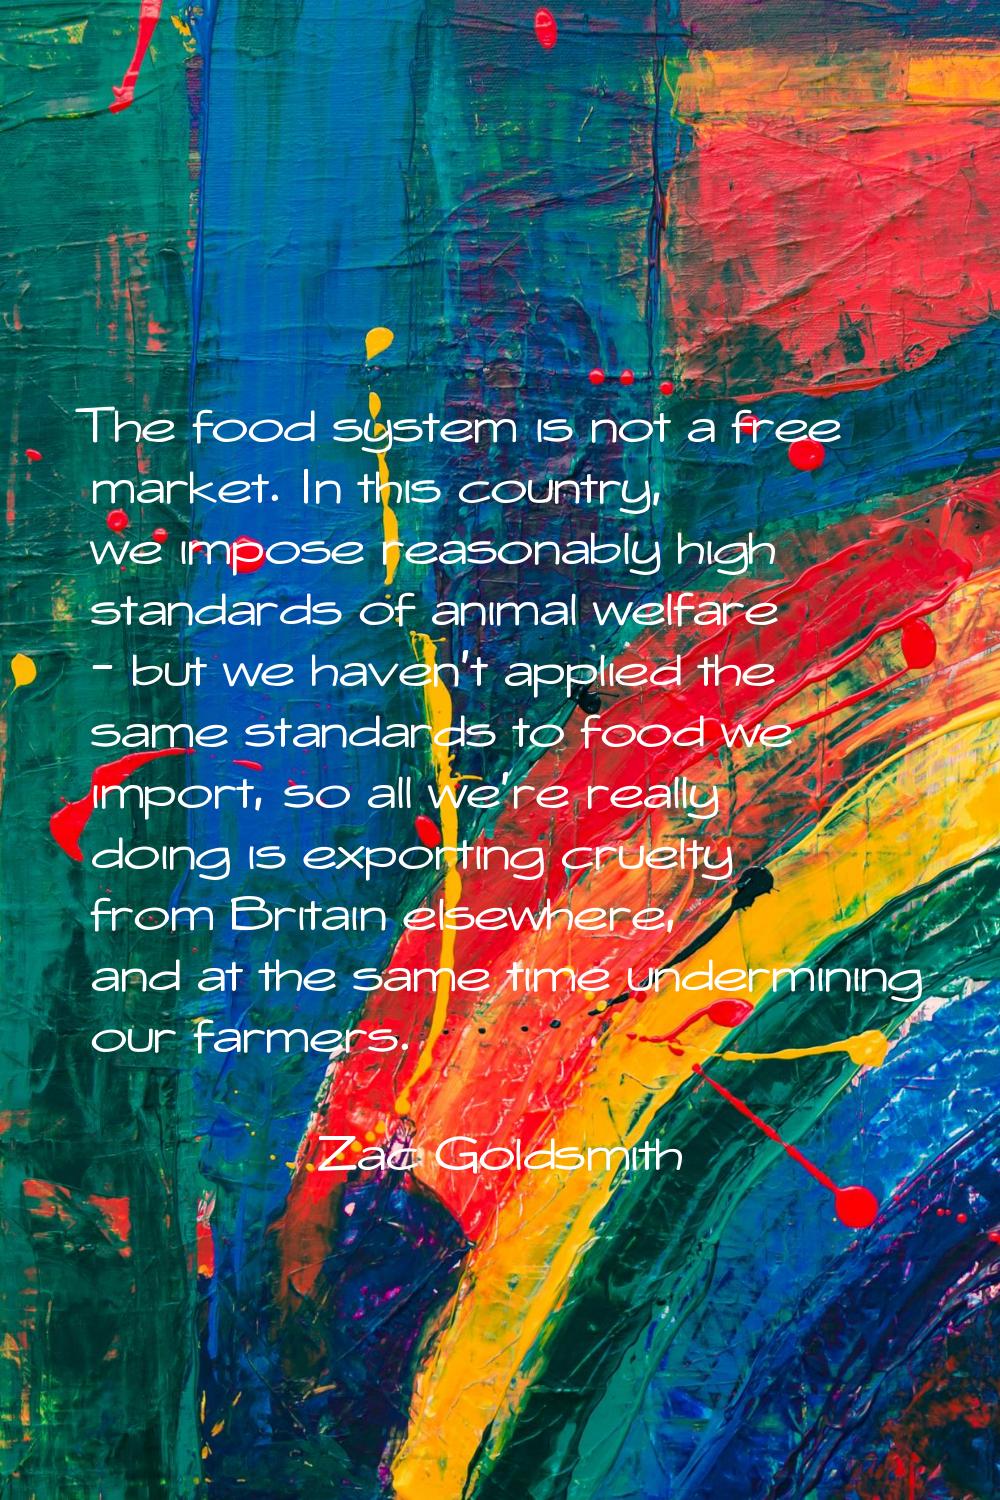 The food system is not a free market. In this country, we impose reasonably high standards of anima